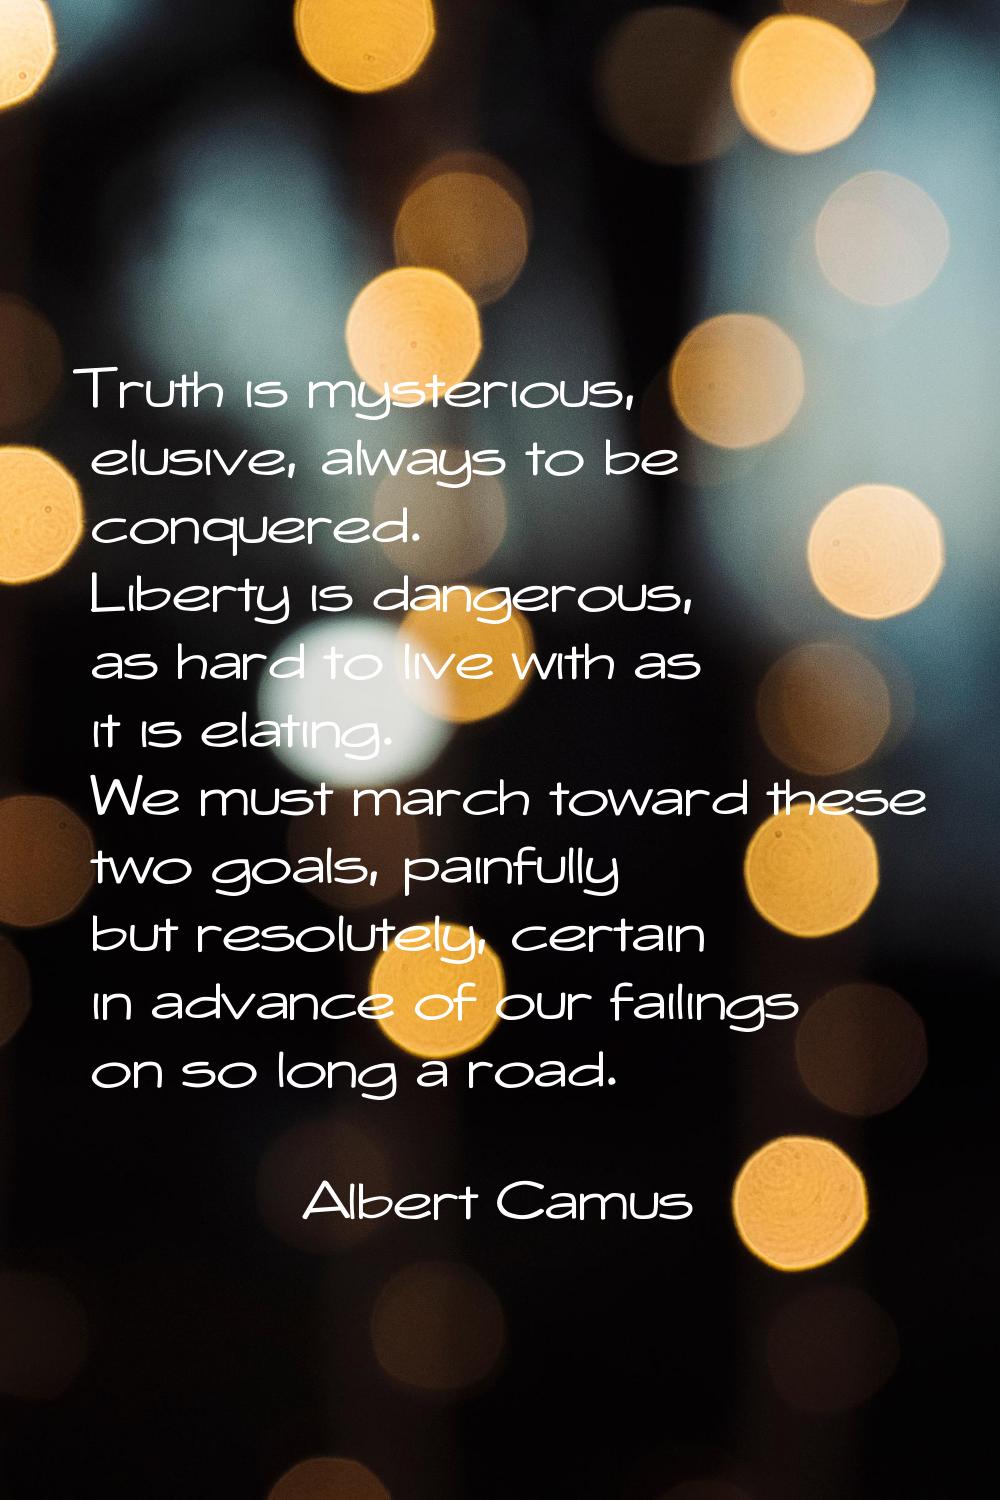 Truth is mysterious, elusive, always to be conquered. Liberty is dangerous, as hard to live with as